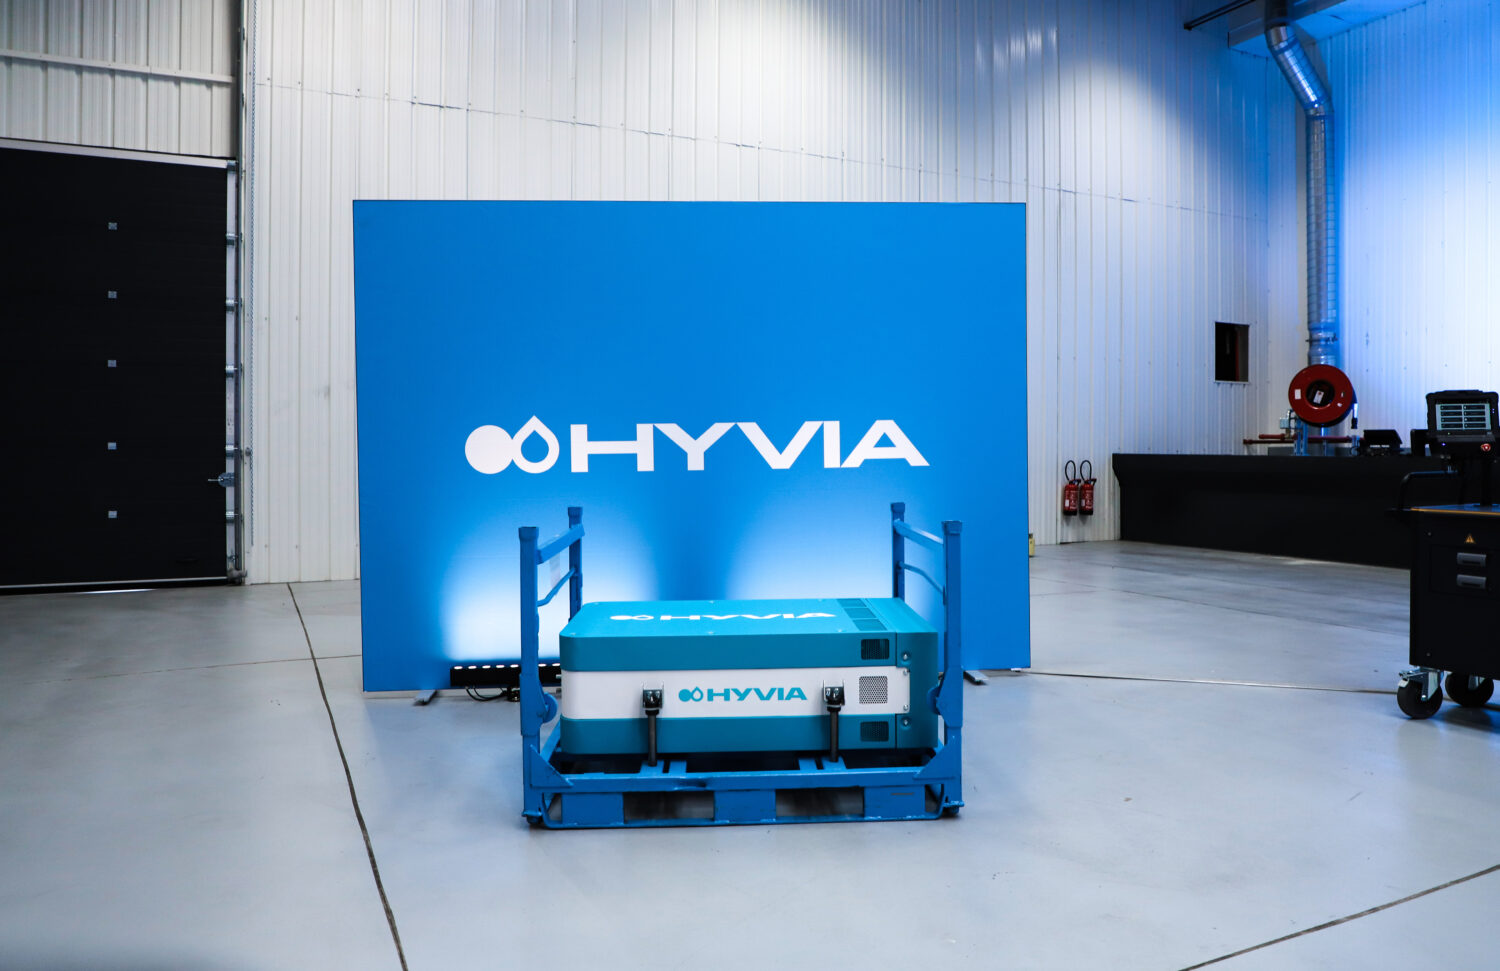 2022 - Inauguration of HYVIA plant in Flins